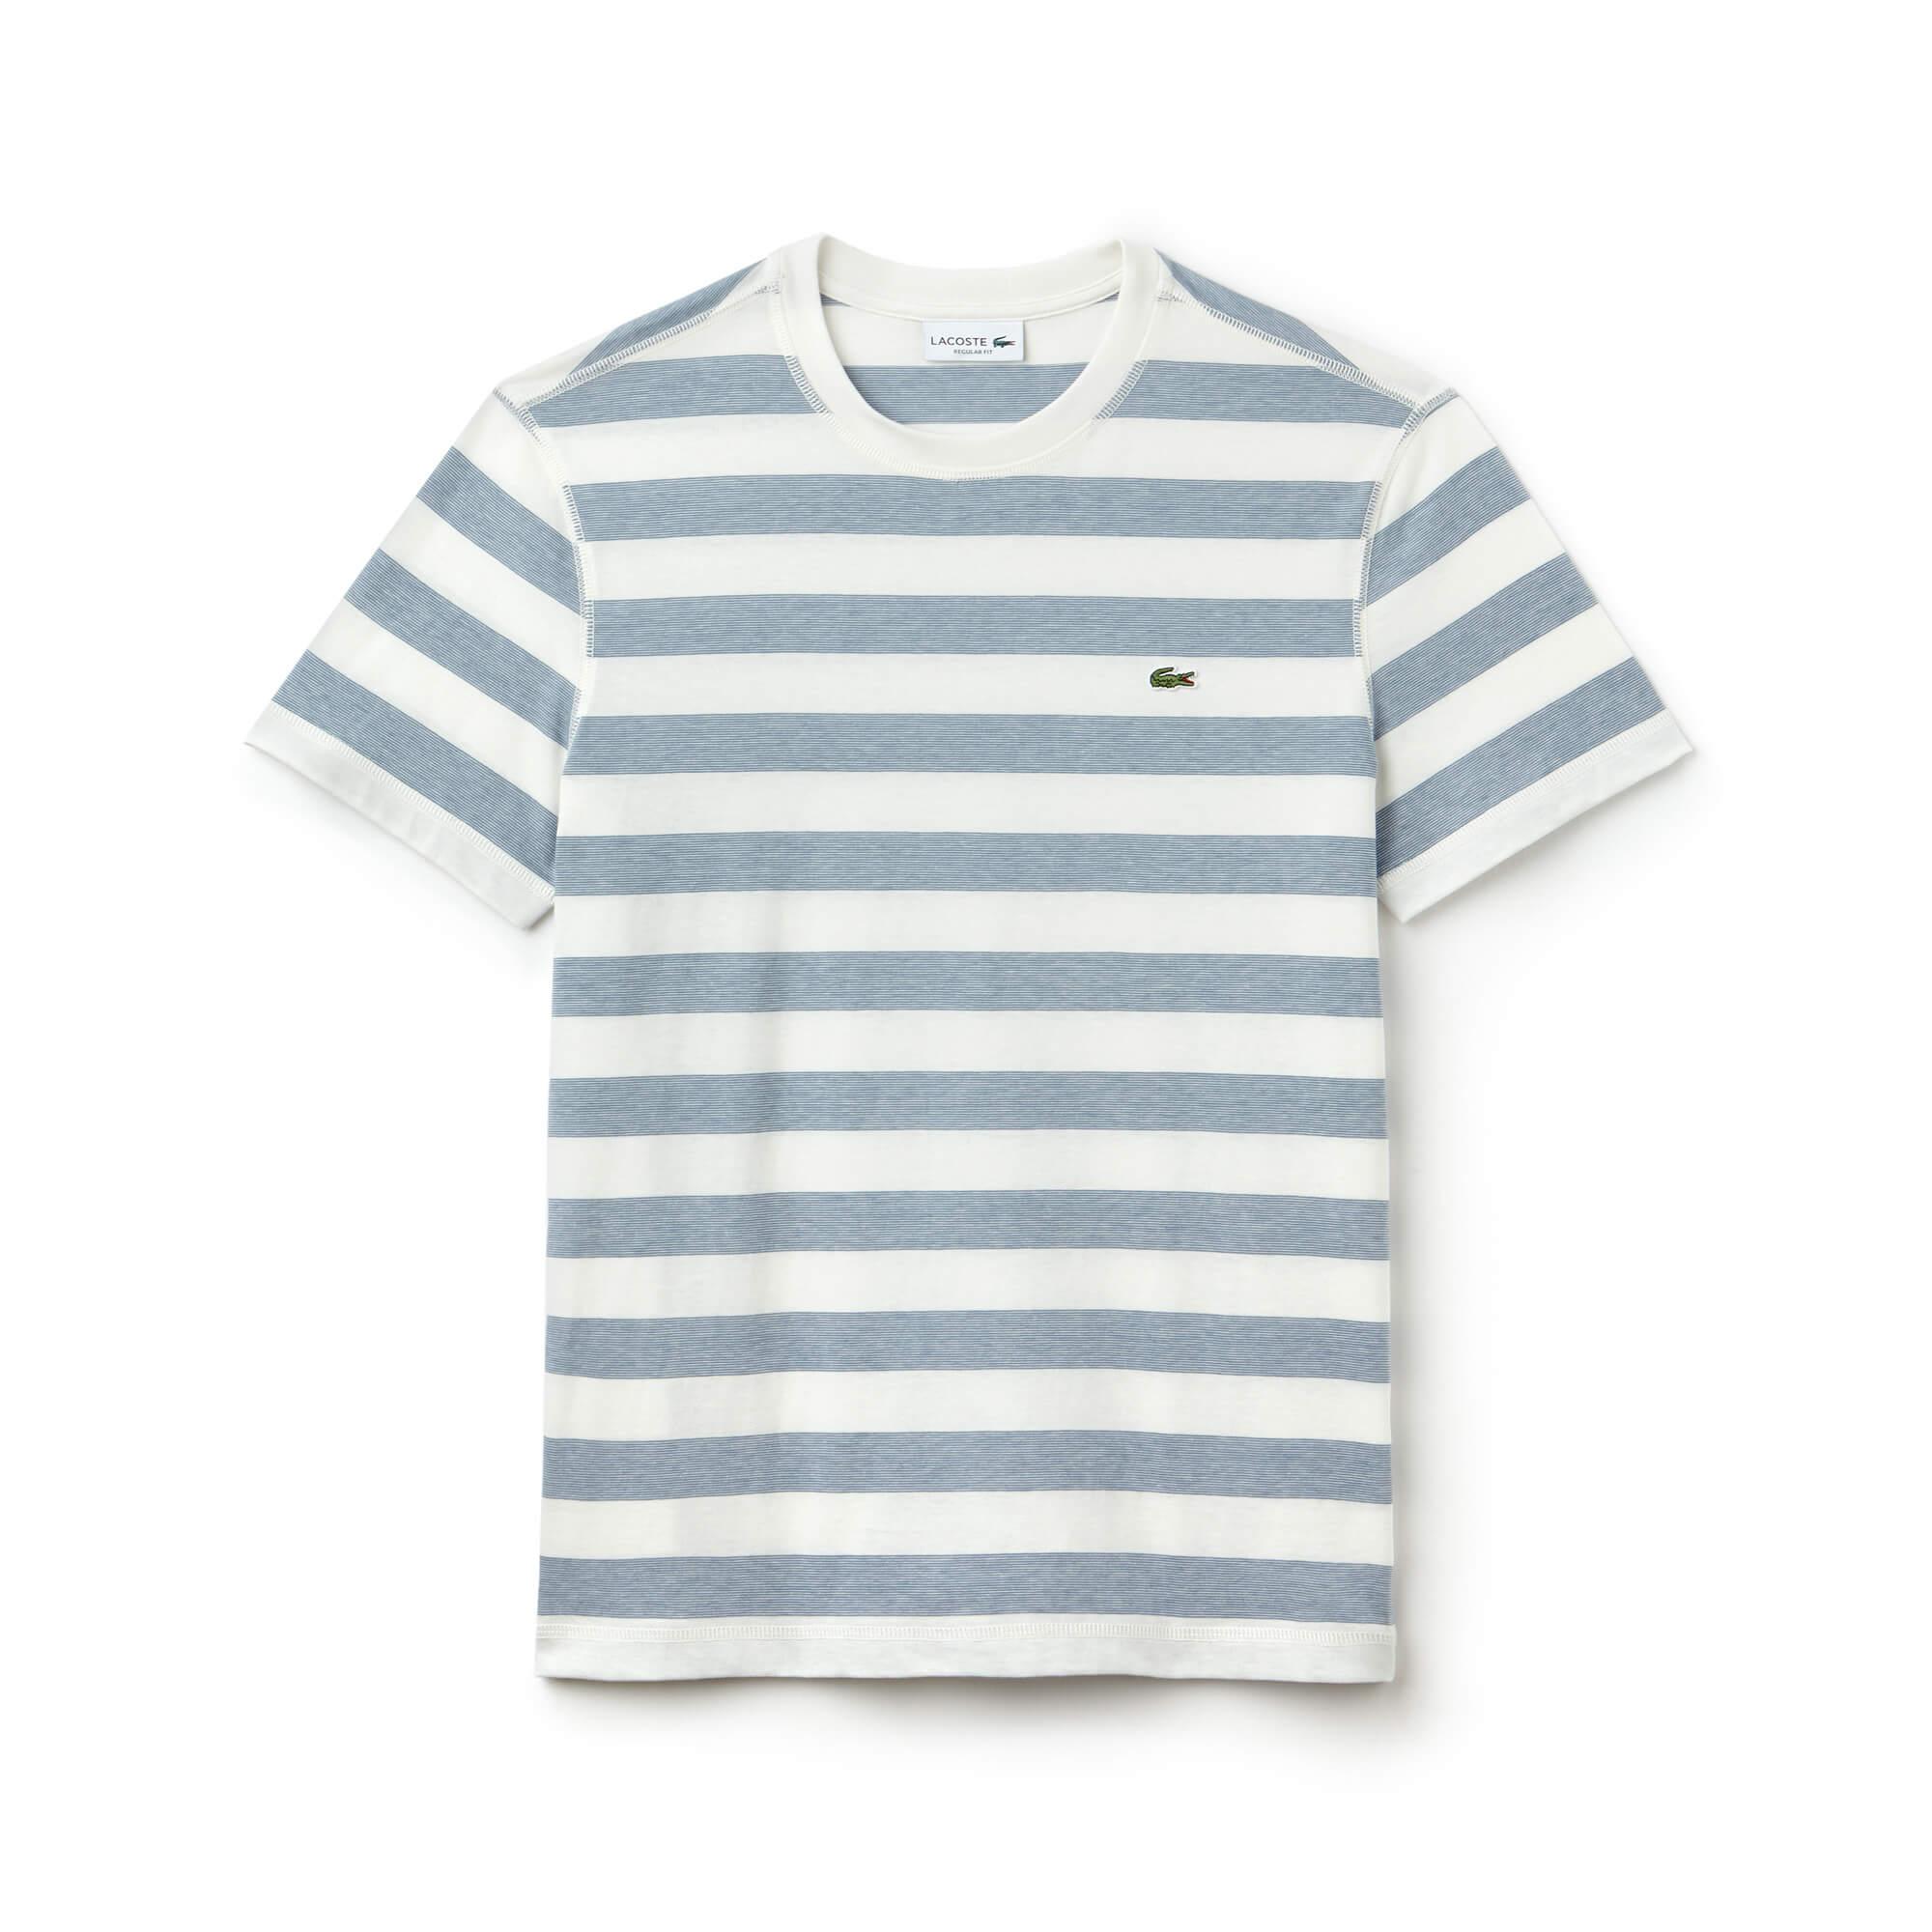 Round Neck Striped T-Shirt TH3247 | Lacoste